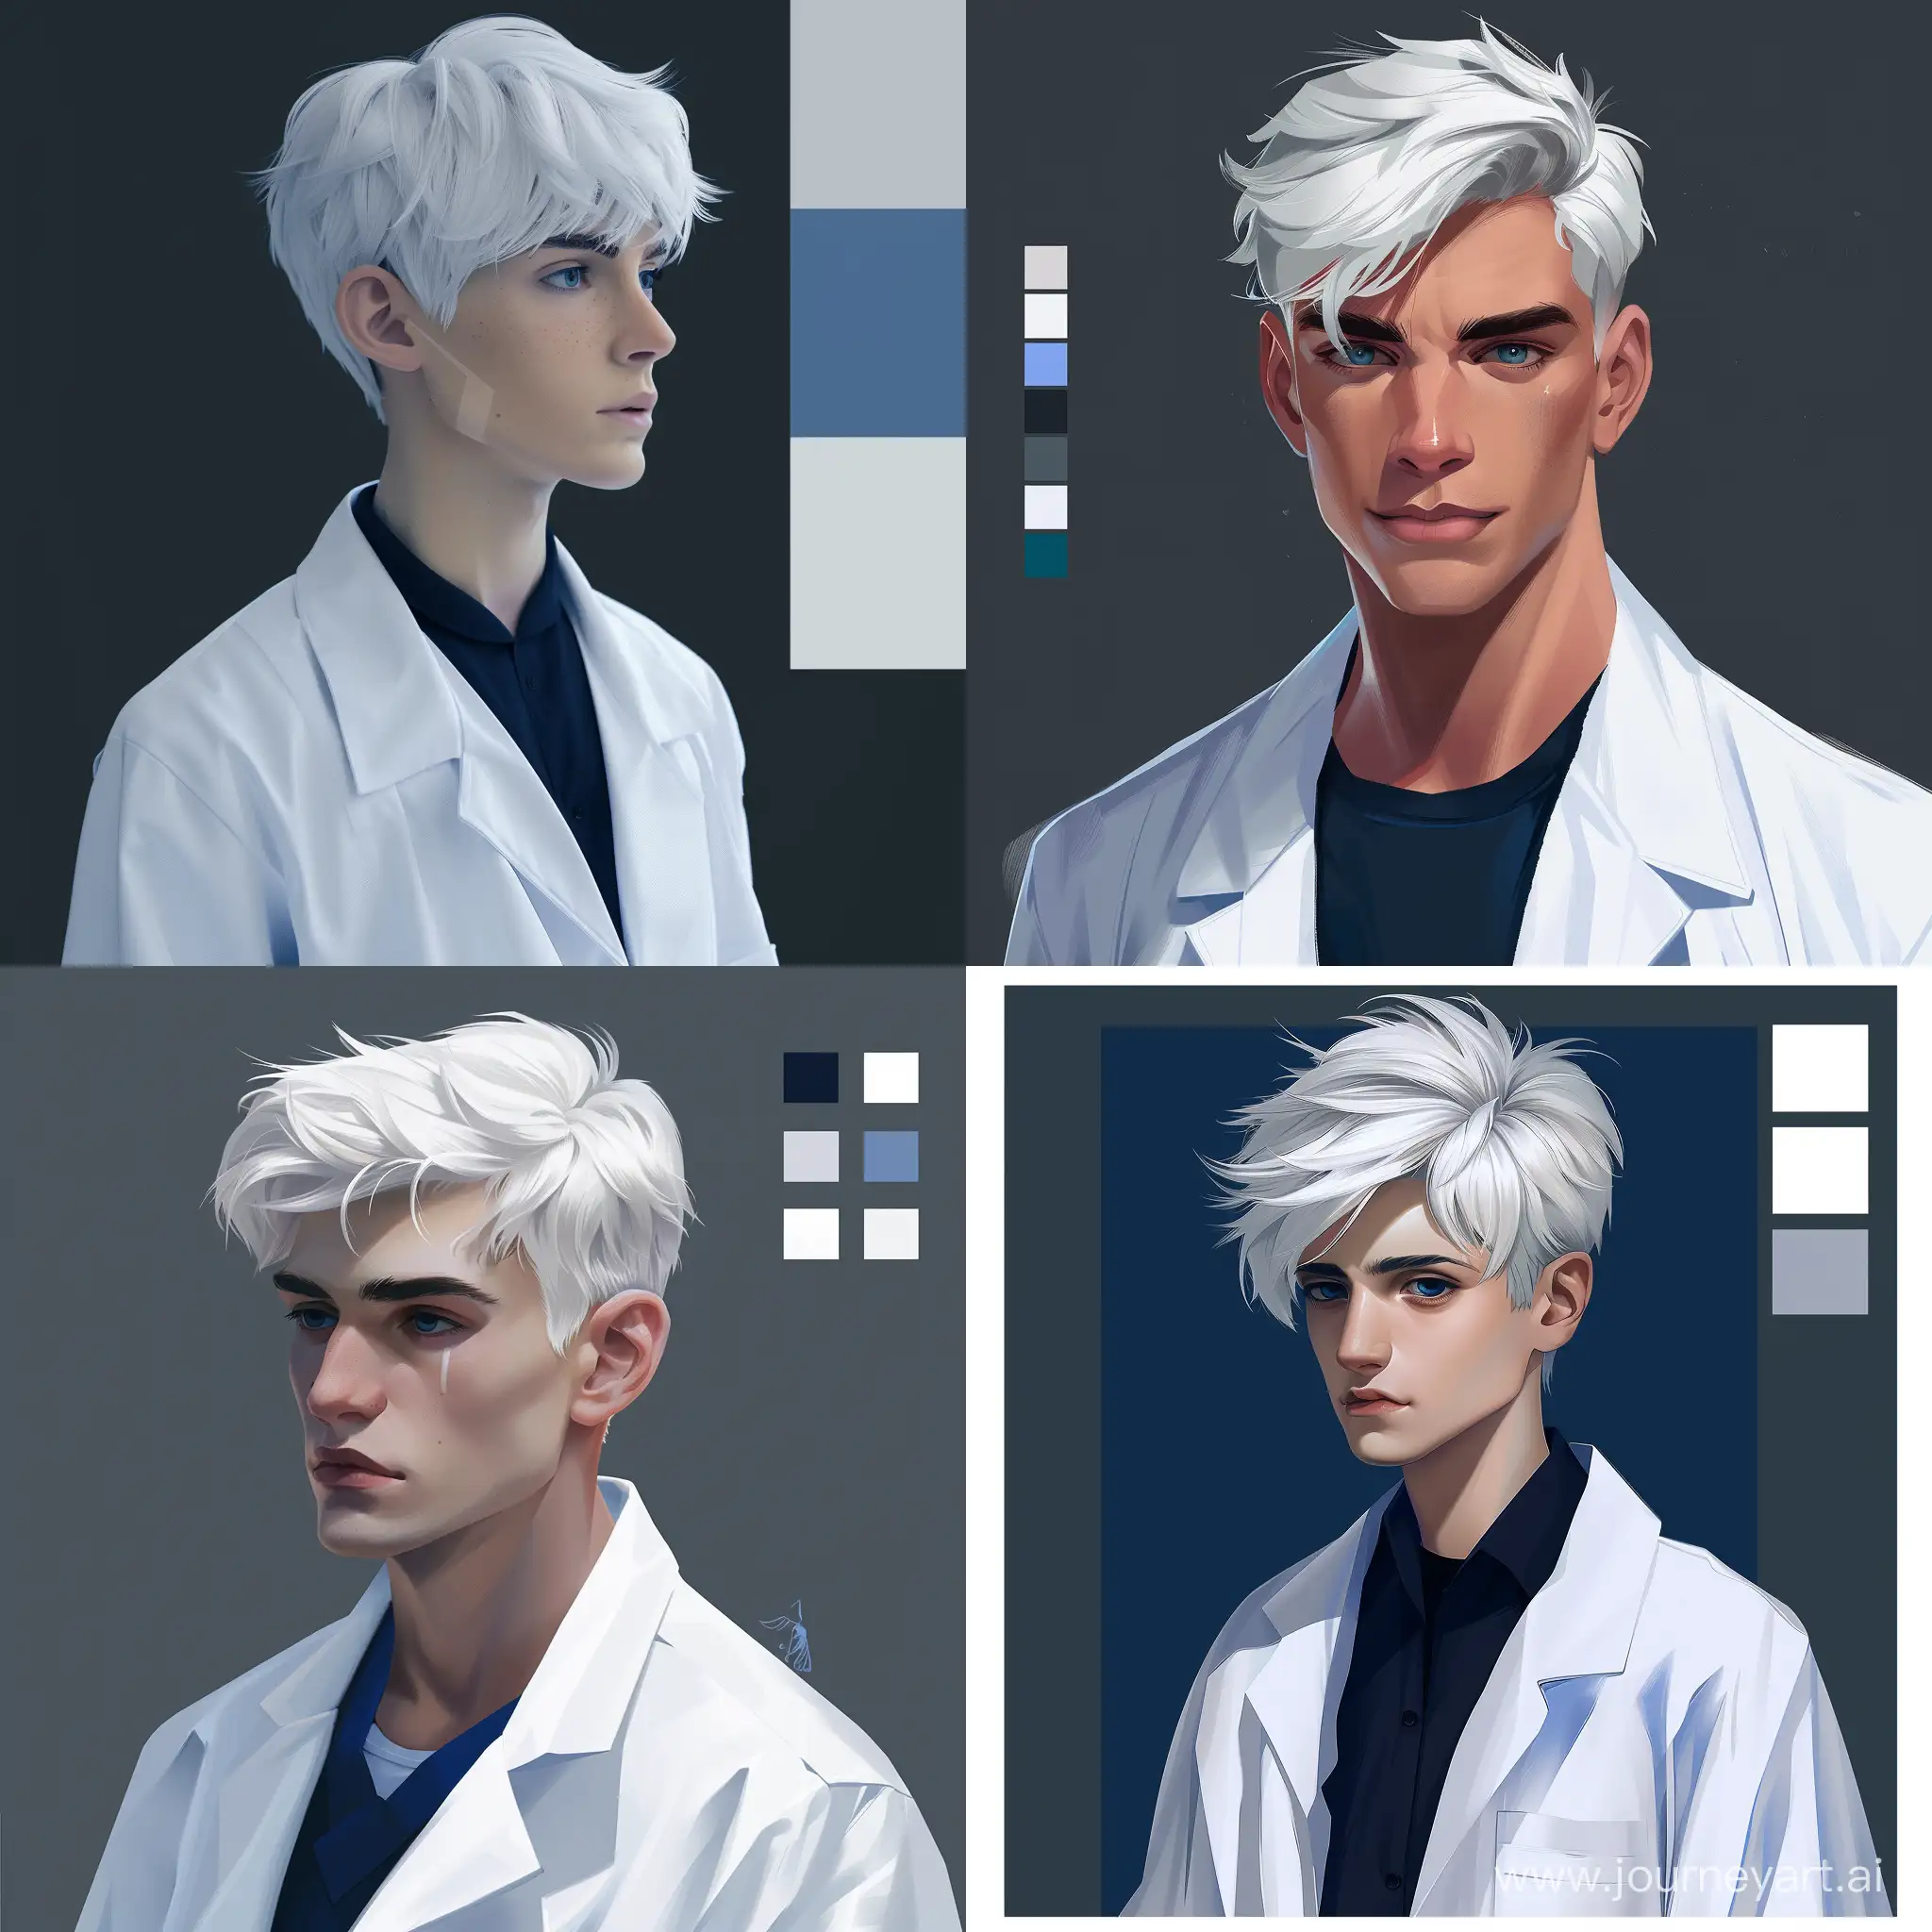 Realistic-Male-VTuber-with-Short-White-Hair-and-Lab-Coat